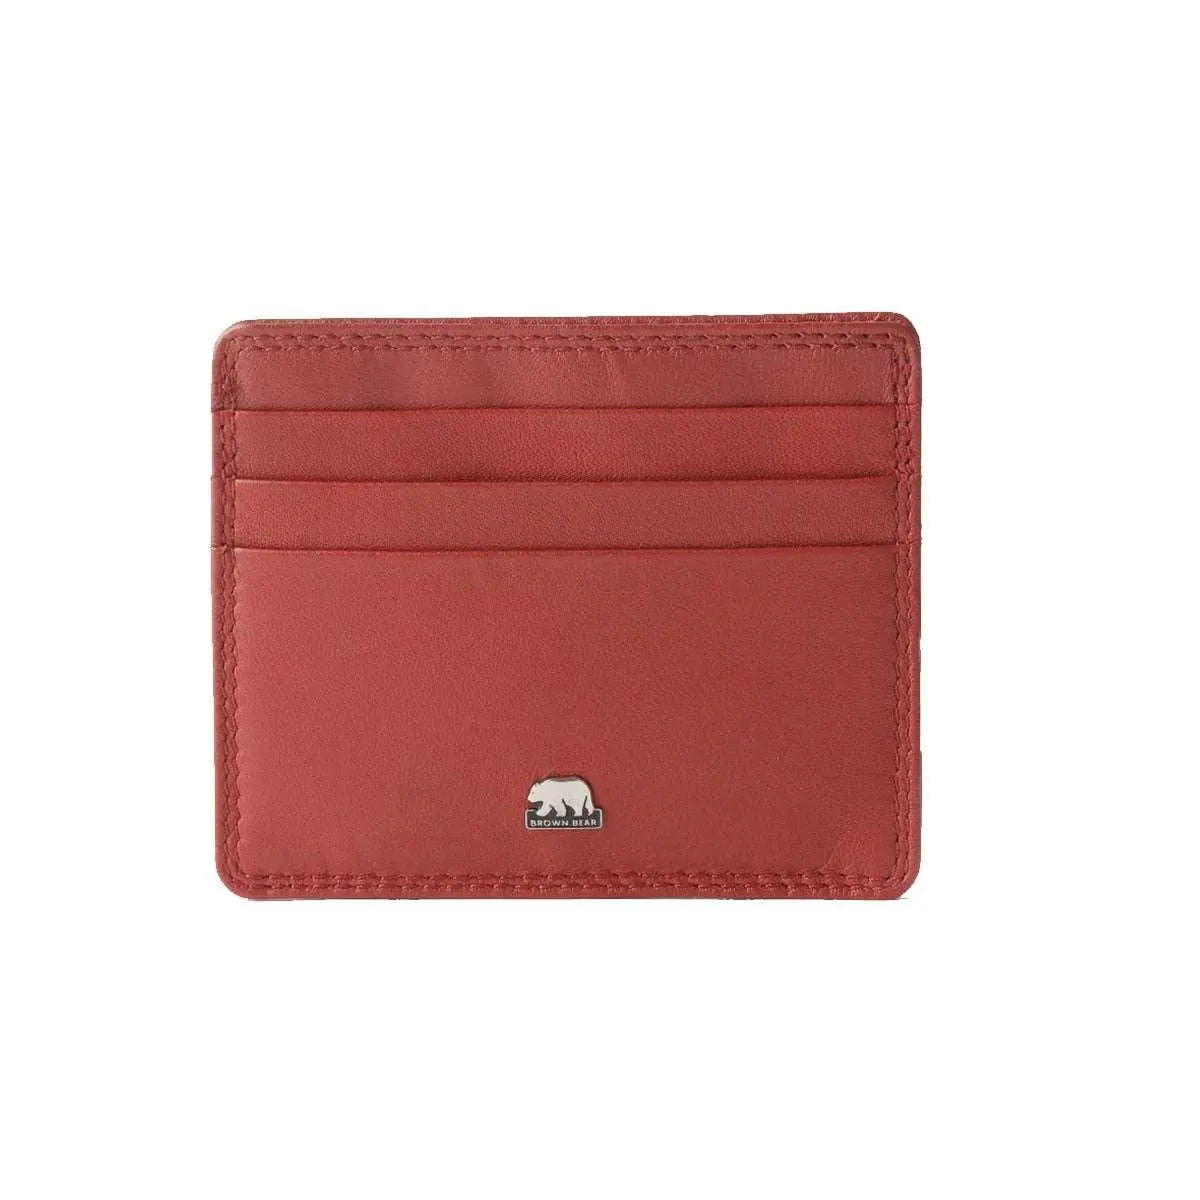 Card Holder Wallets: Buy Best Card Holder Wallets Online at Great Prices -  Zouk